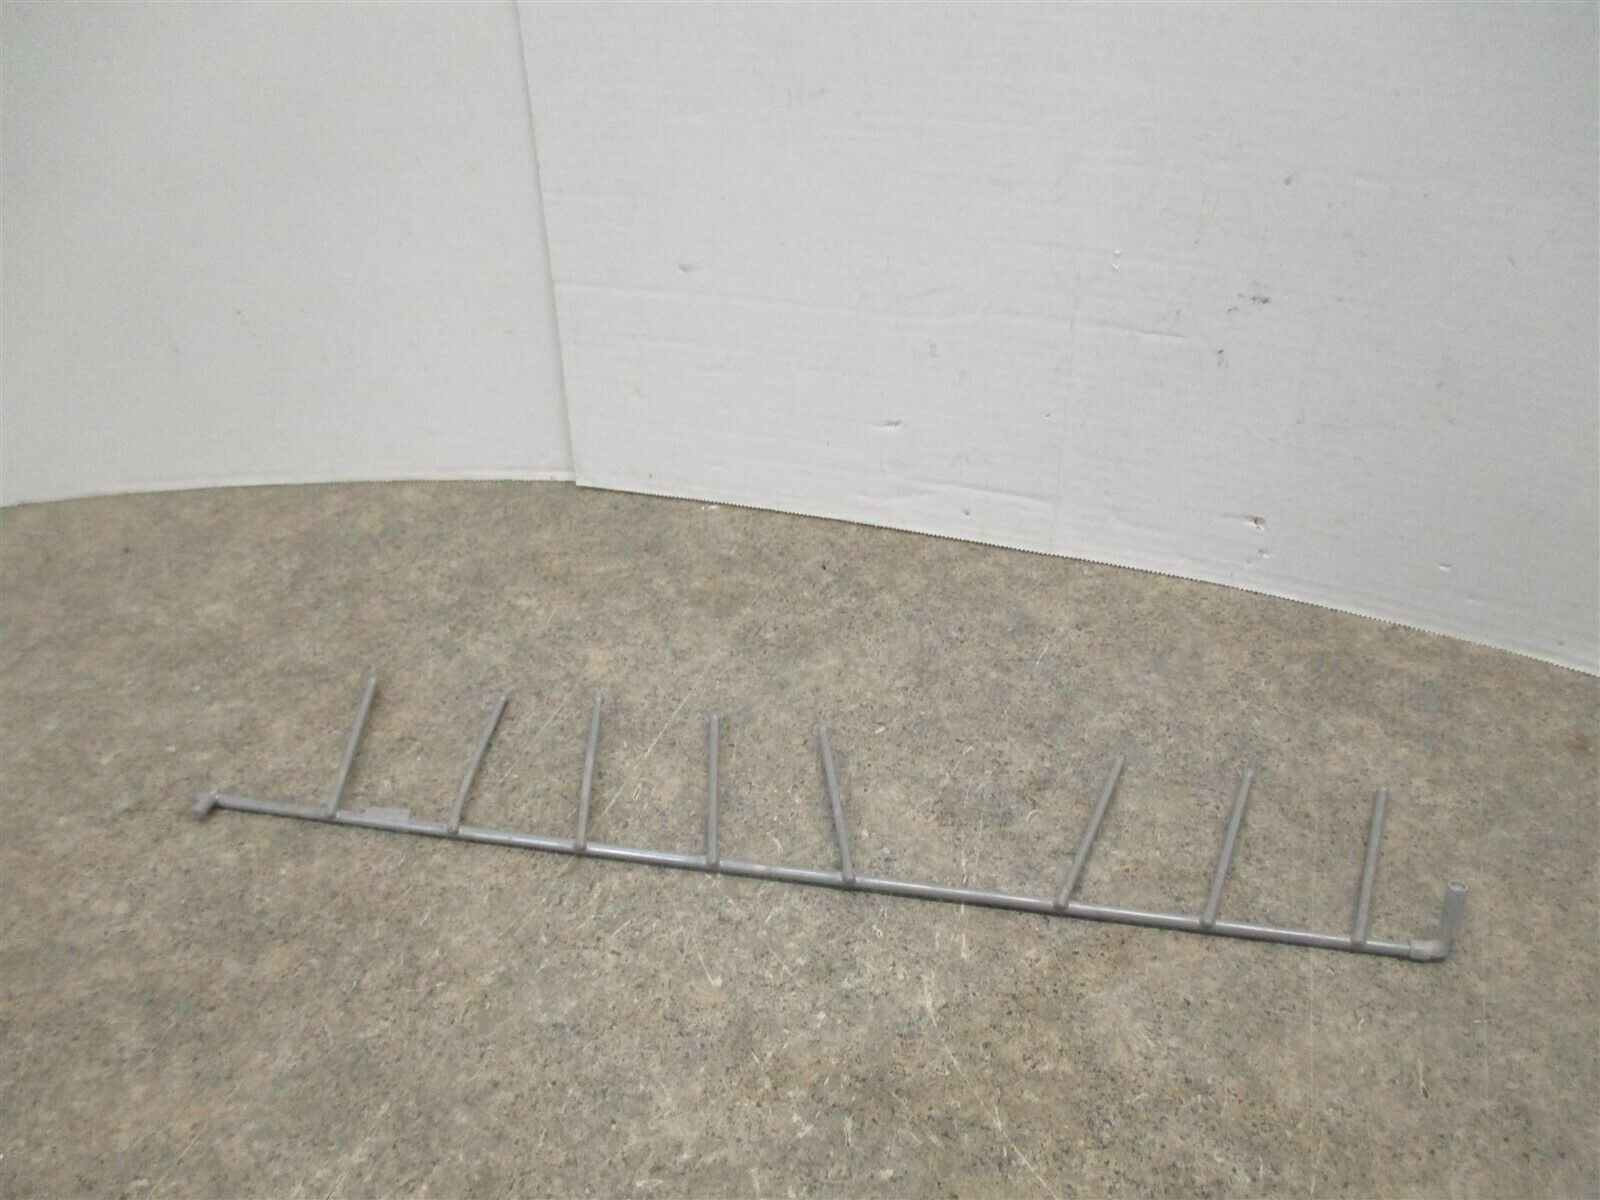 THERMADOR DISHWASHER TINE (RUST) PART# DWHD651JFP/90 - $30.00